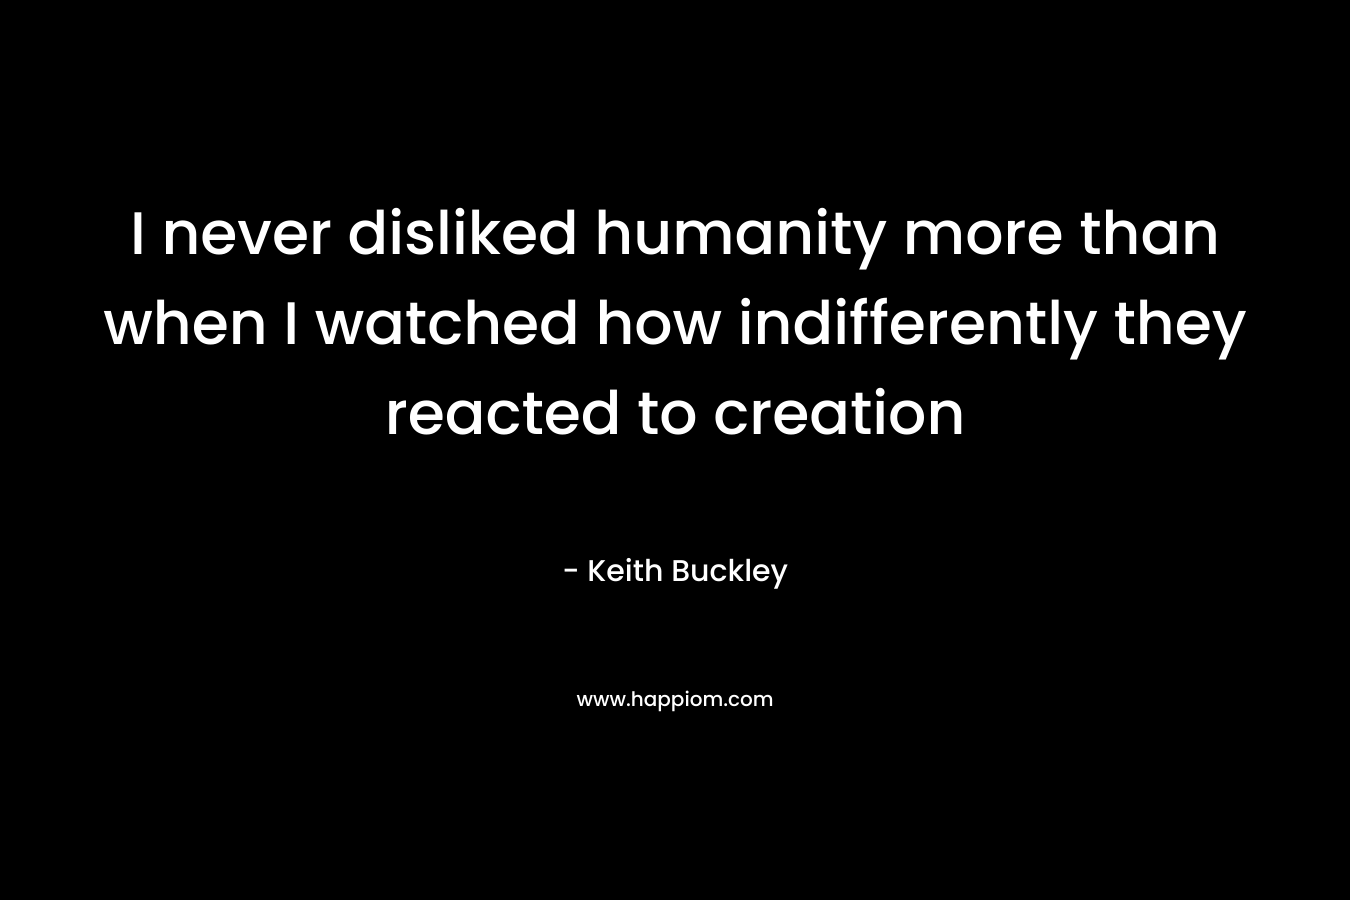 I never disliked humanity more than when I watched how indifferently they reacted to creation – Keith Buckley